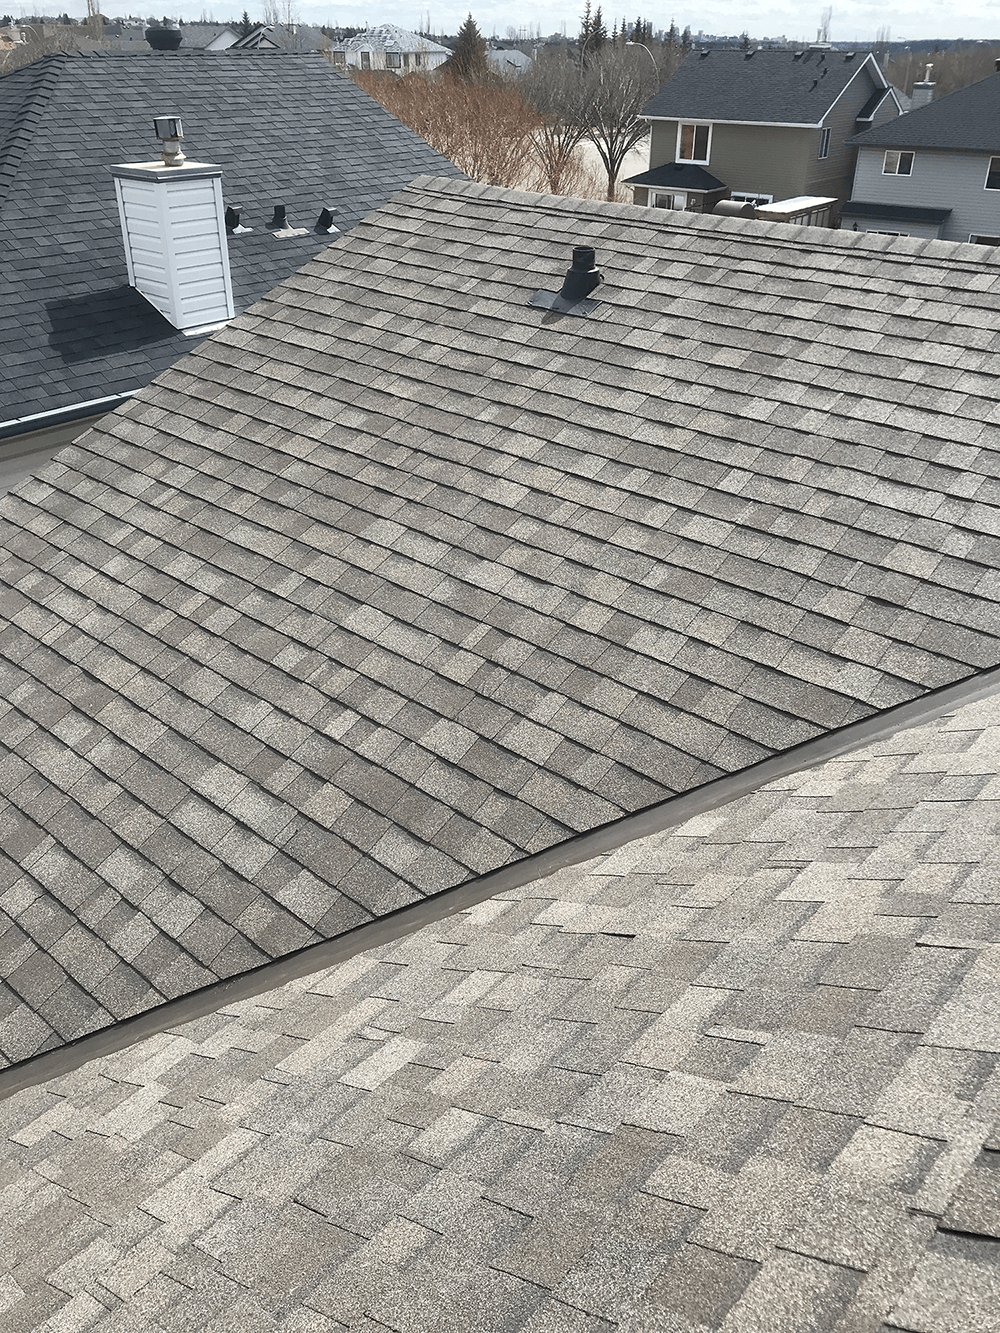 A finished re-roofing project by Jamieson Roofing